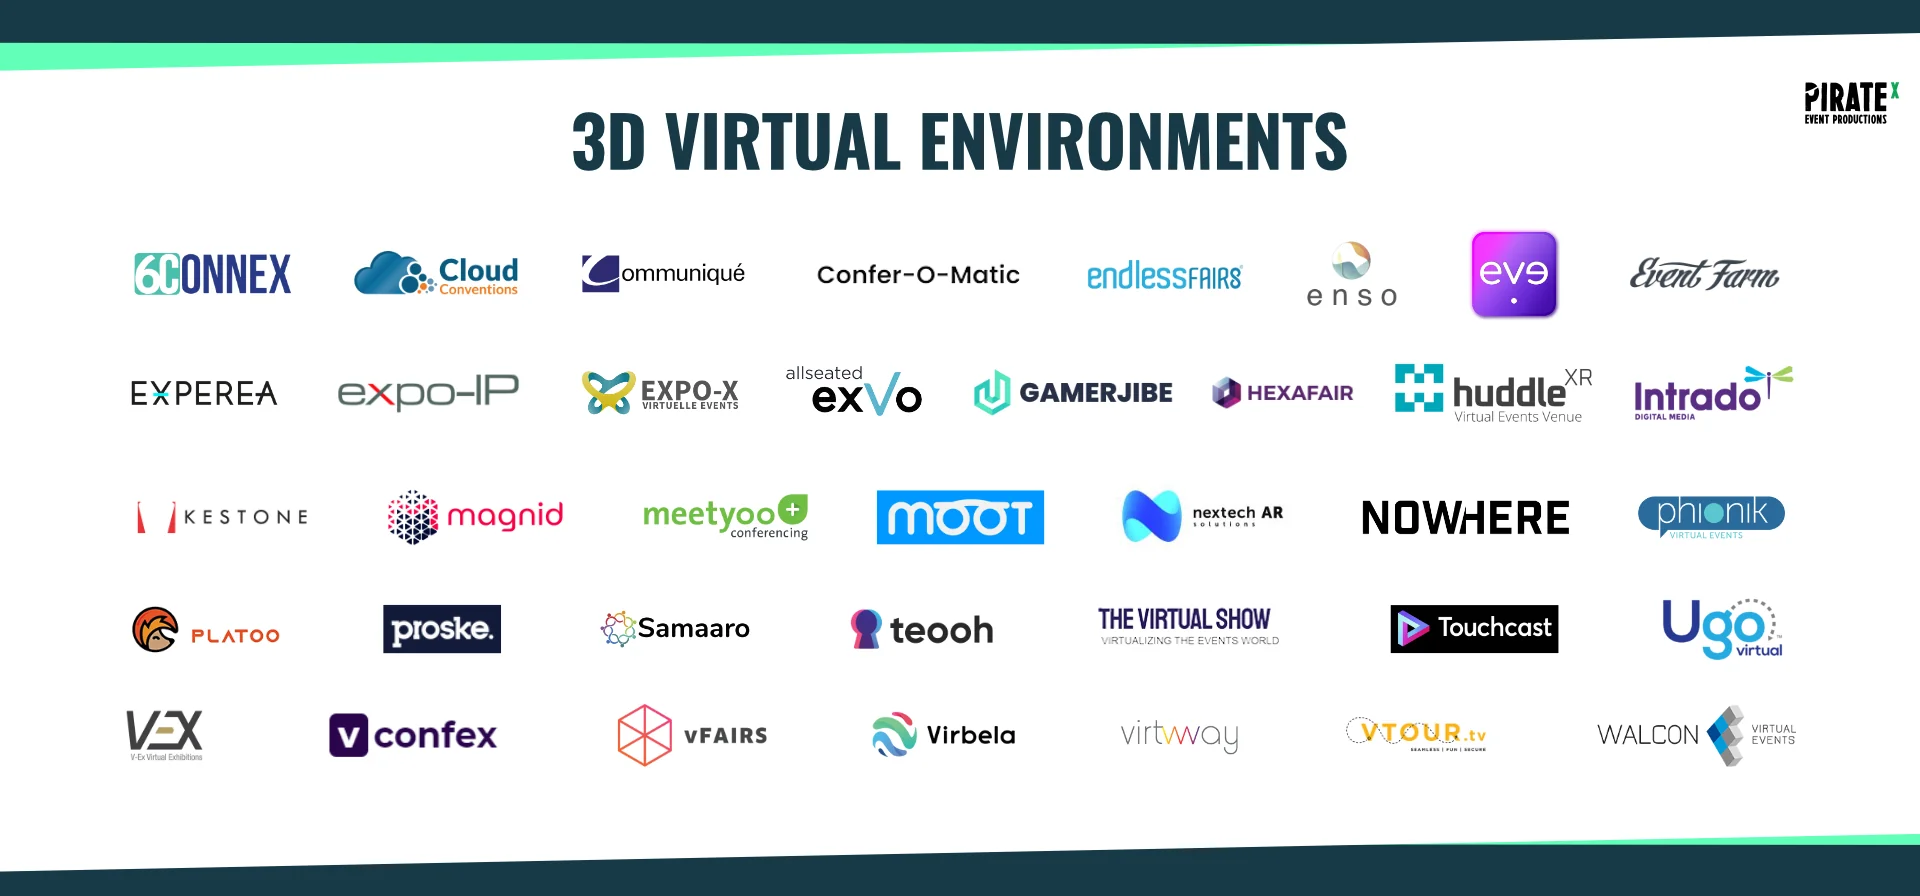 Overview of the Eventtech Landscape April 2021 Update 3D Virtual Environments Category